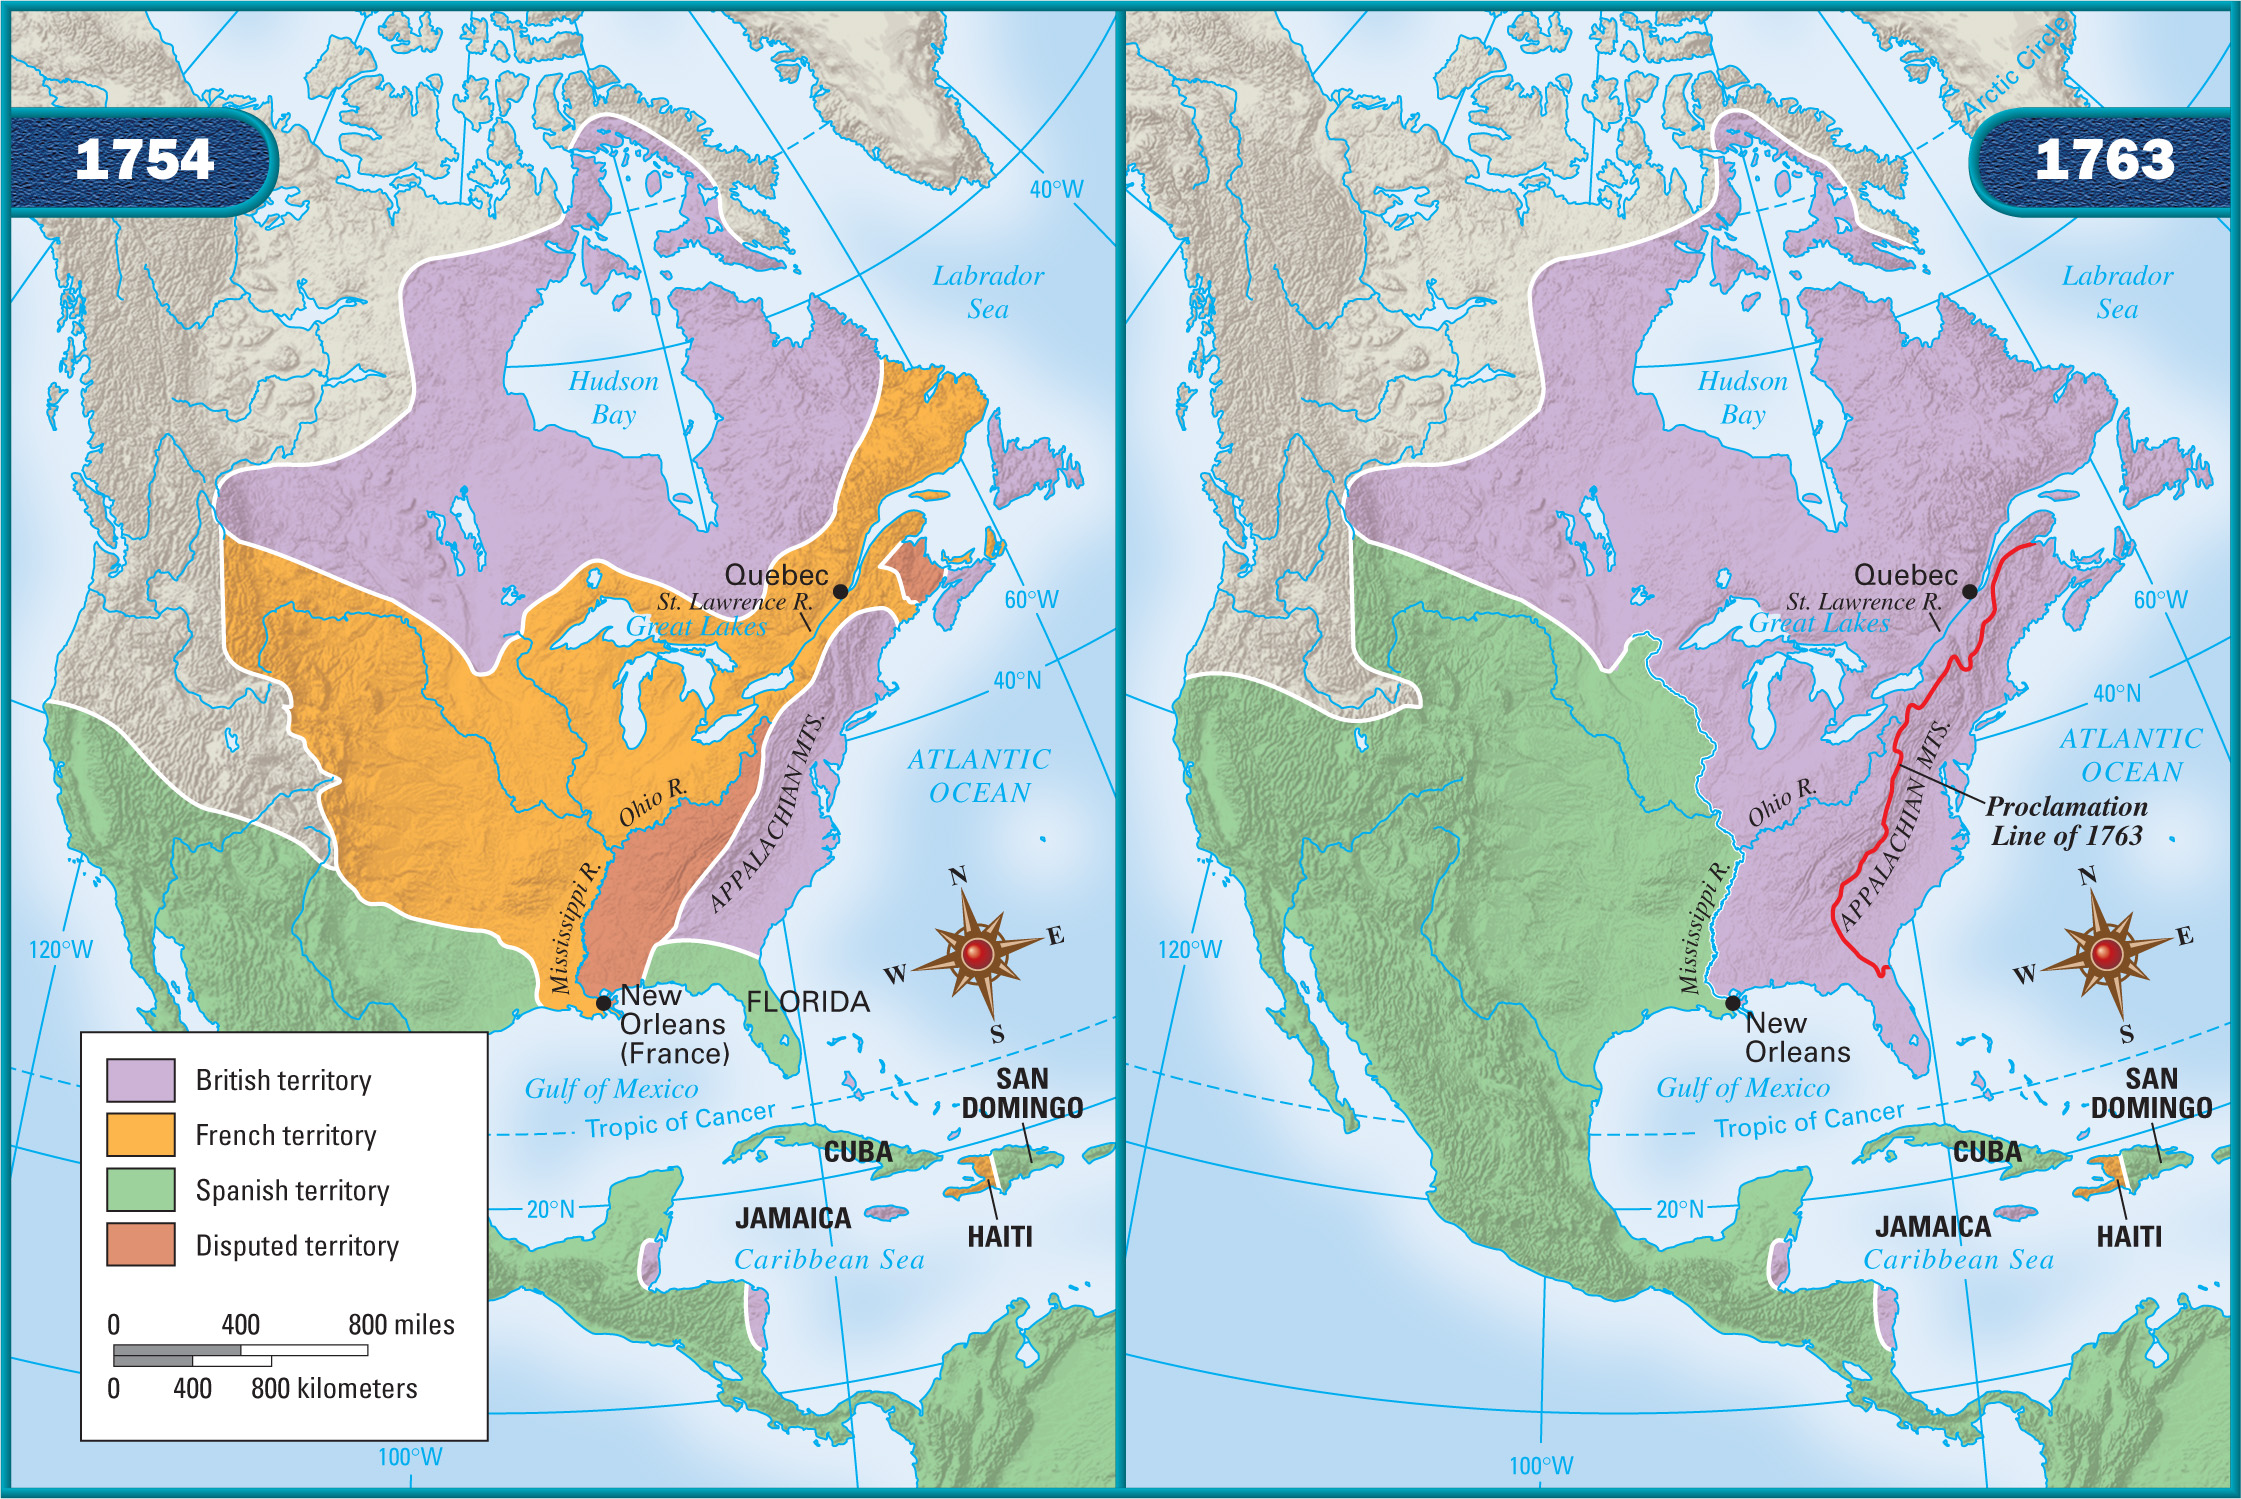 Maps from 1754 and 1763 show changes in which European nations controlled regions of North America.